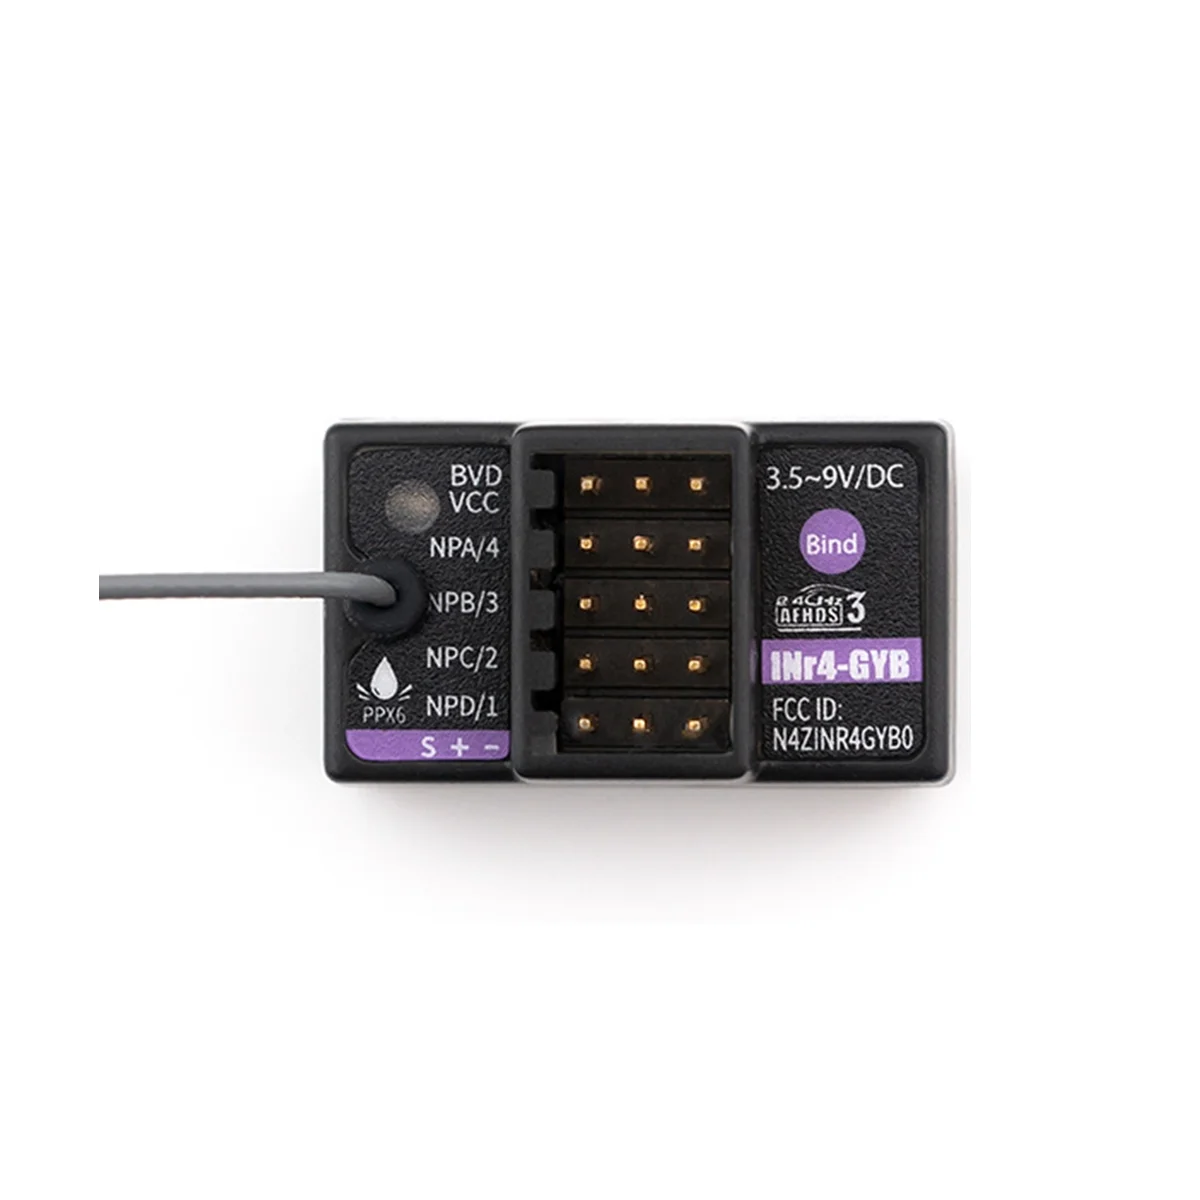 

The Built-In Gyroscope Function Of the New Flysky Inr4-Gyb Receiver Is Applicable To the Nb4/Pro Remote Controller